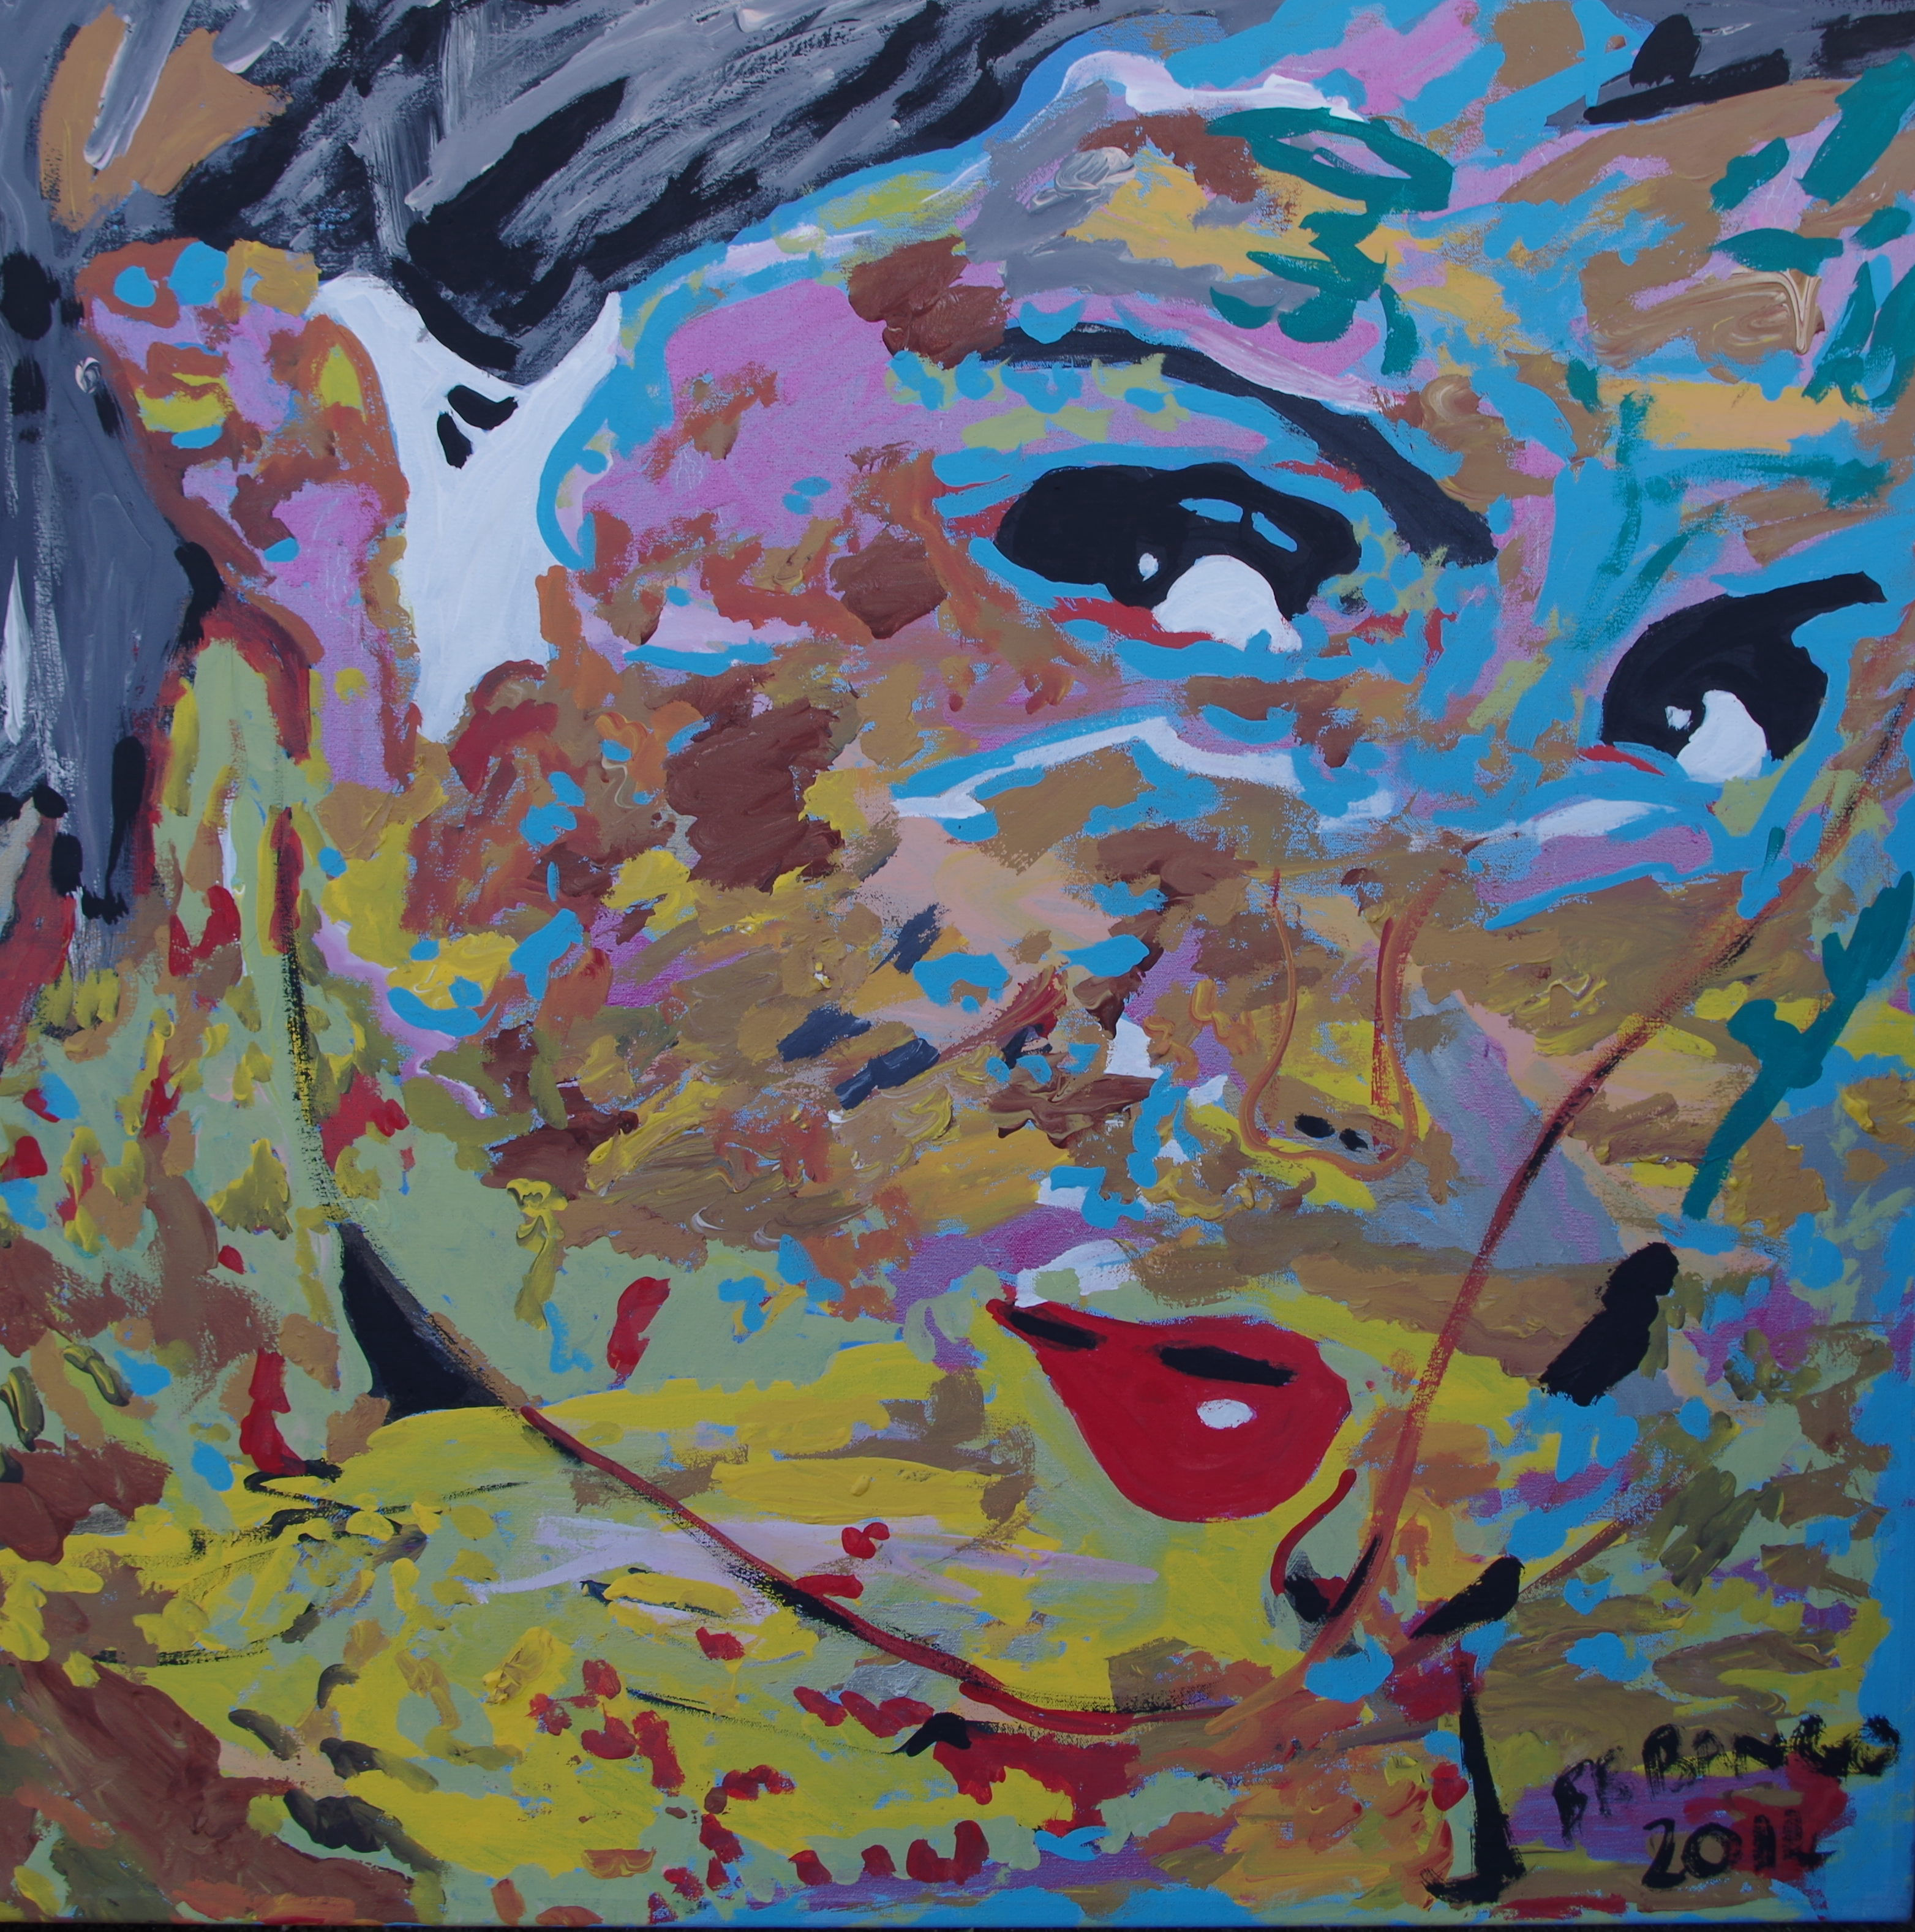 'The Face' by BB Bango 24 by 24 inch acrylic on canvas. Sold to art collector in UK